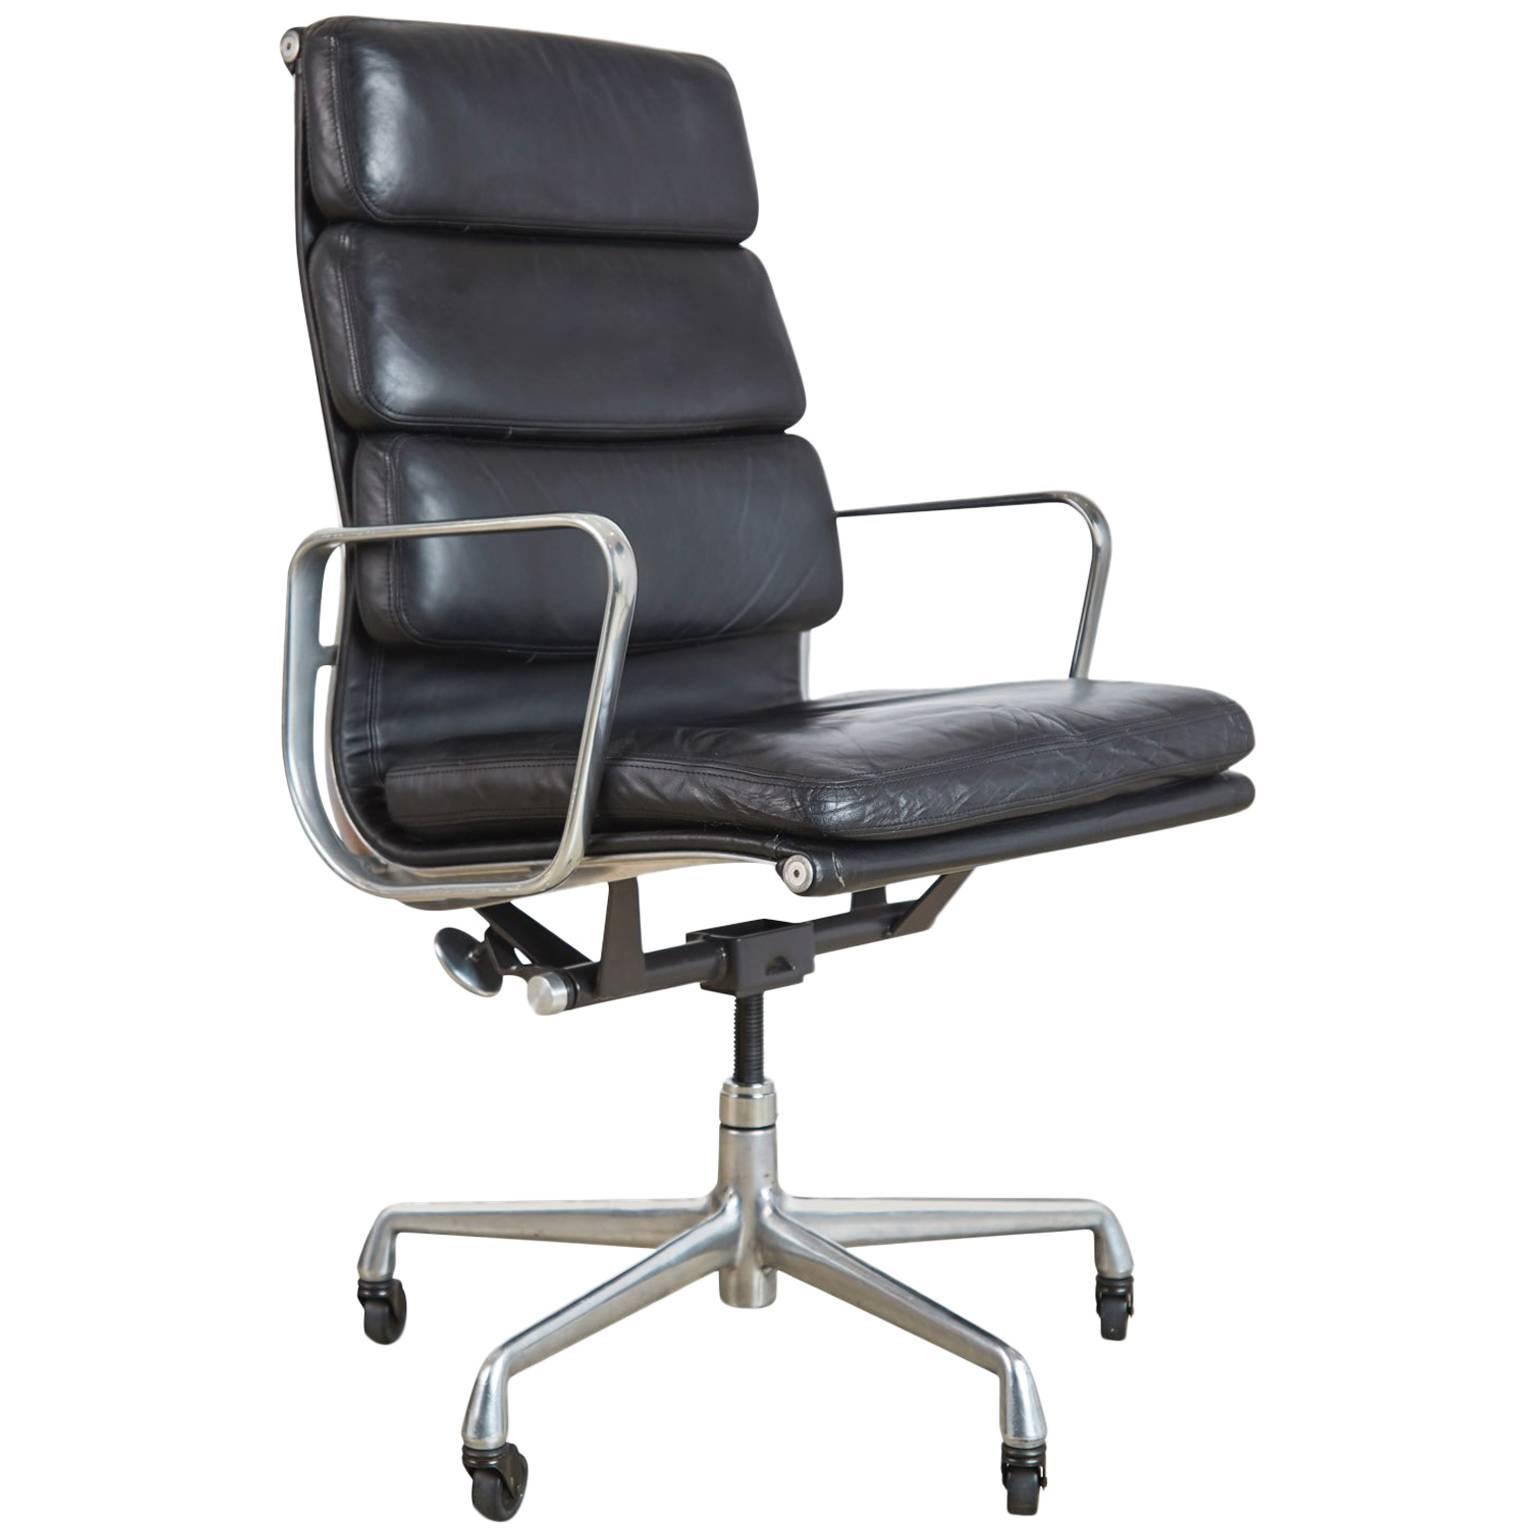 Charles & Ray Eames Leather High Back Soft Pad Executive Chair for Herman Miller